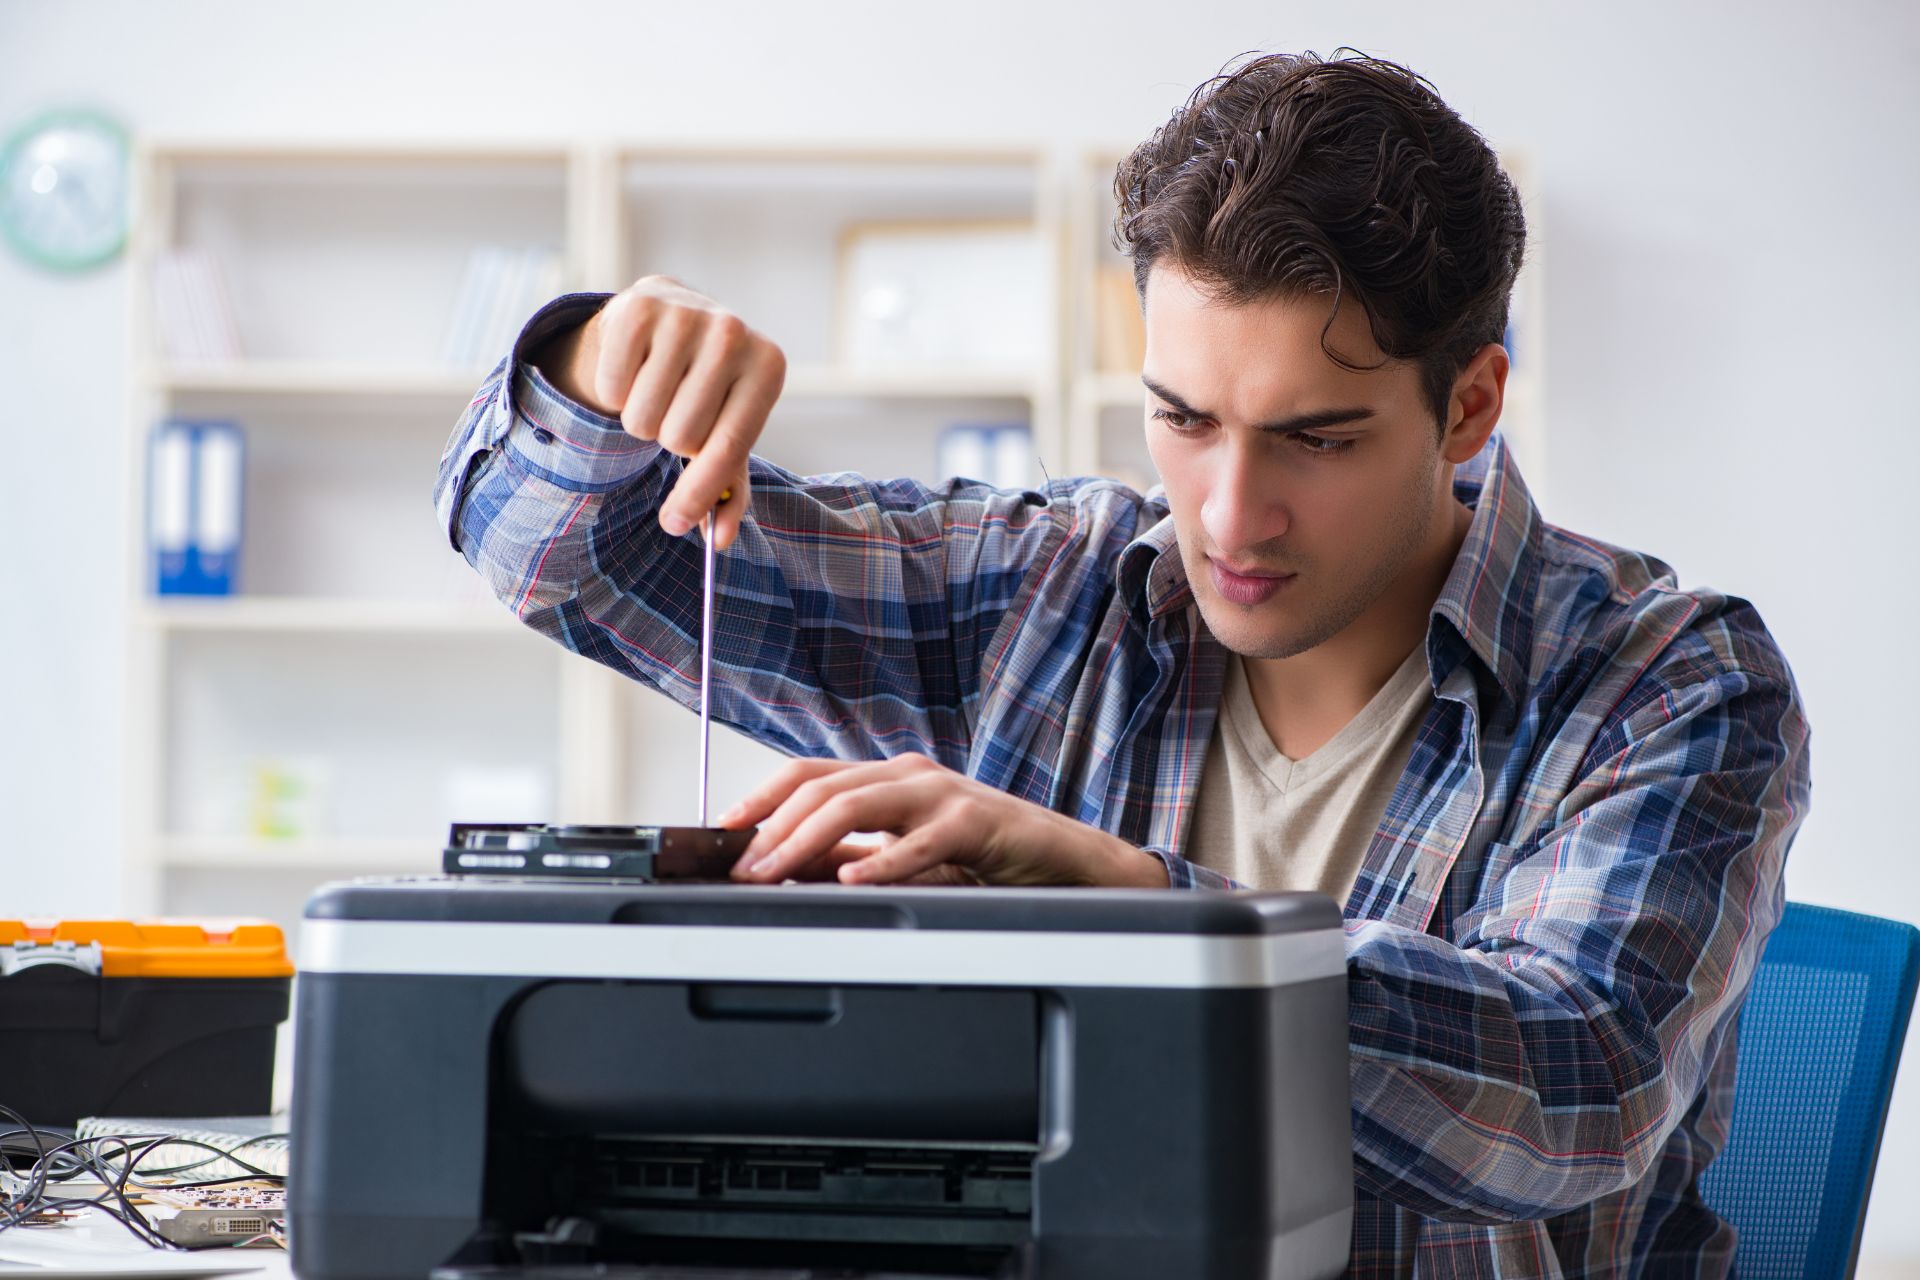 A man attempts to fix his home office printer with a screwdriver